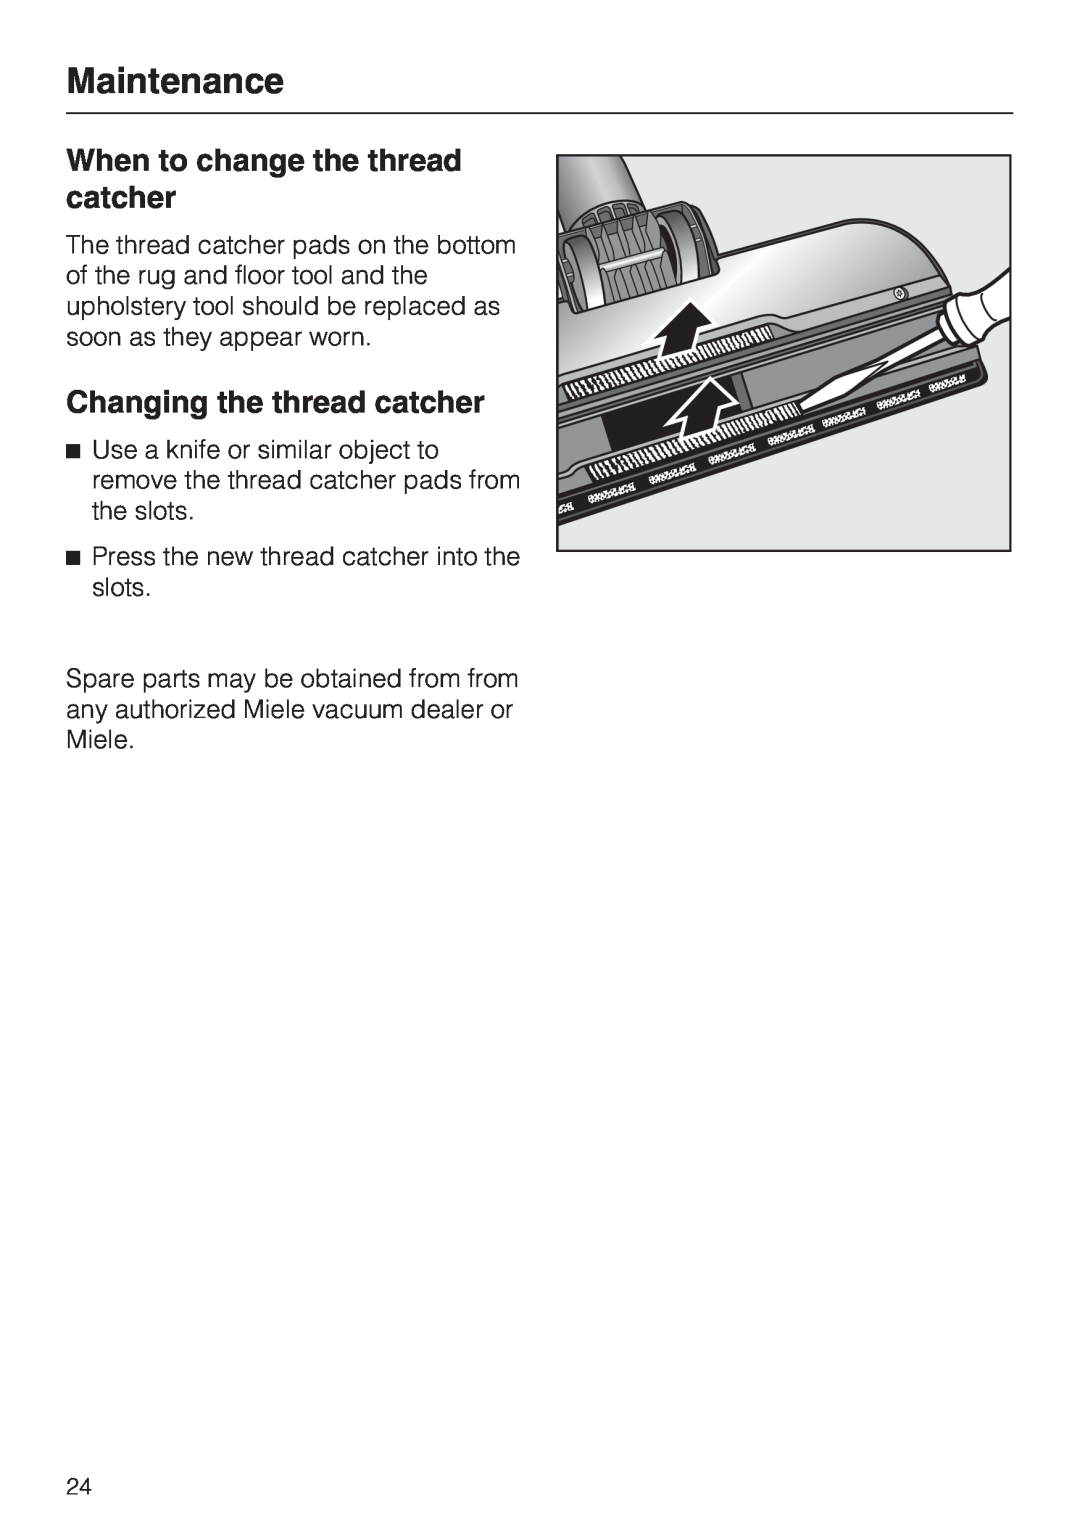 Miele S 190 manual When to change the thread catcher, Changing the thread catcher, Maintenance 